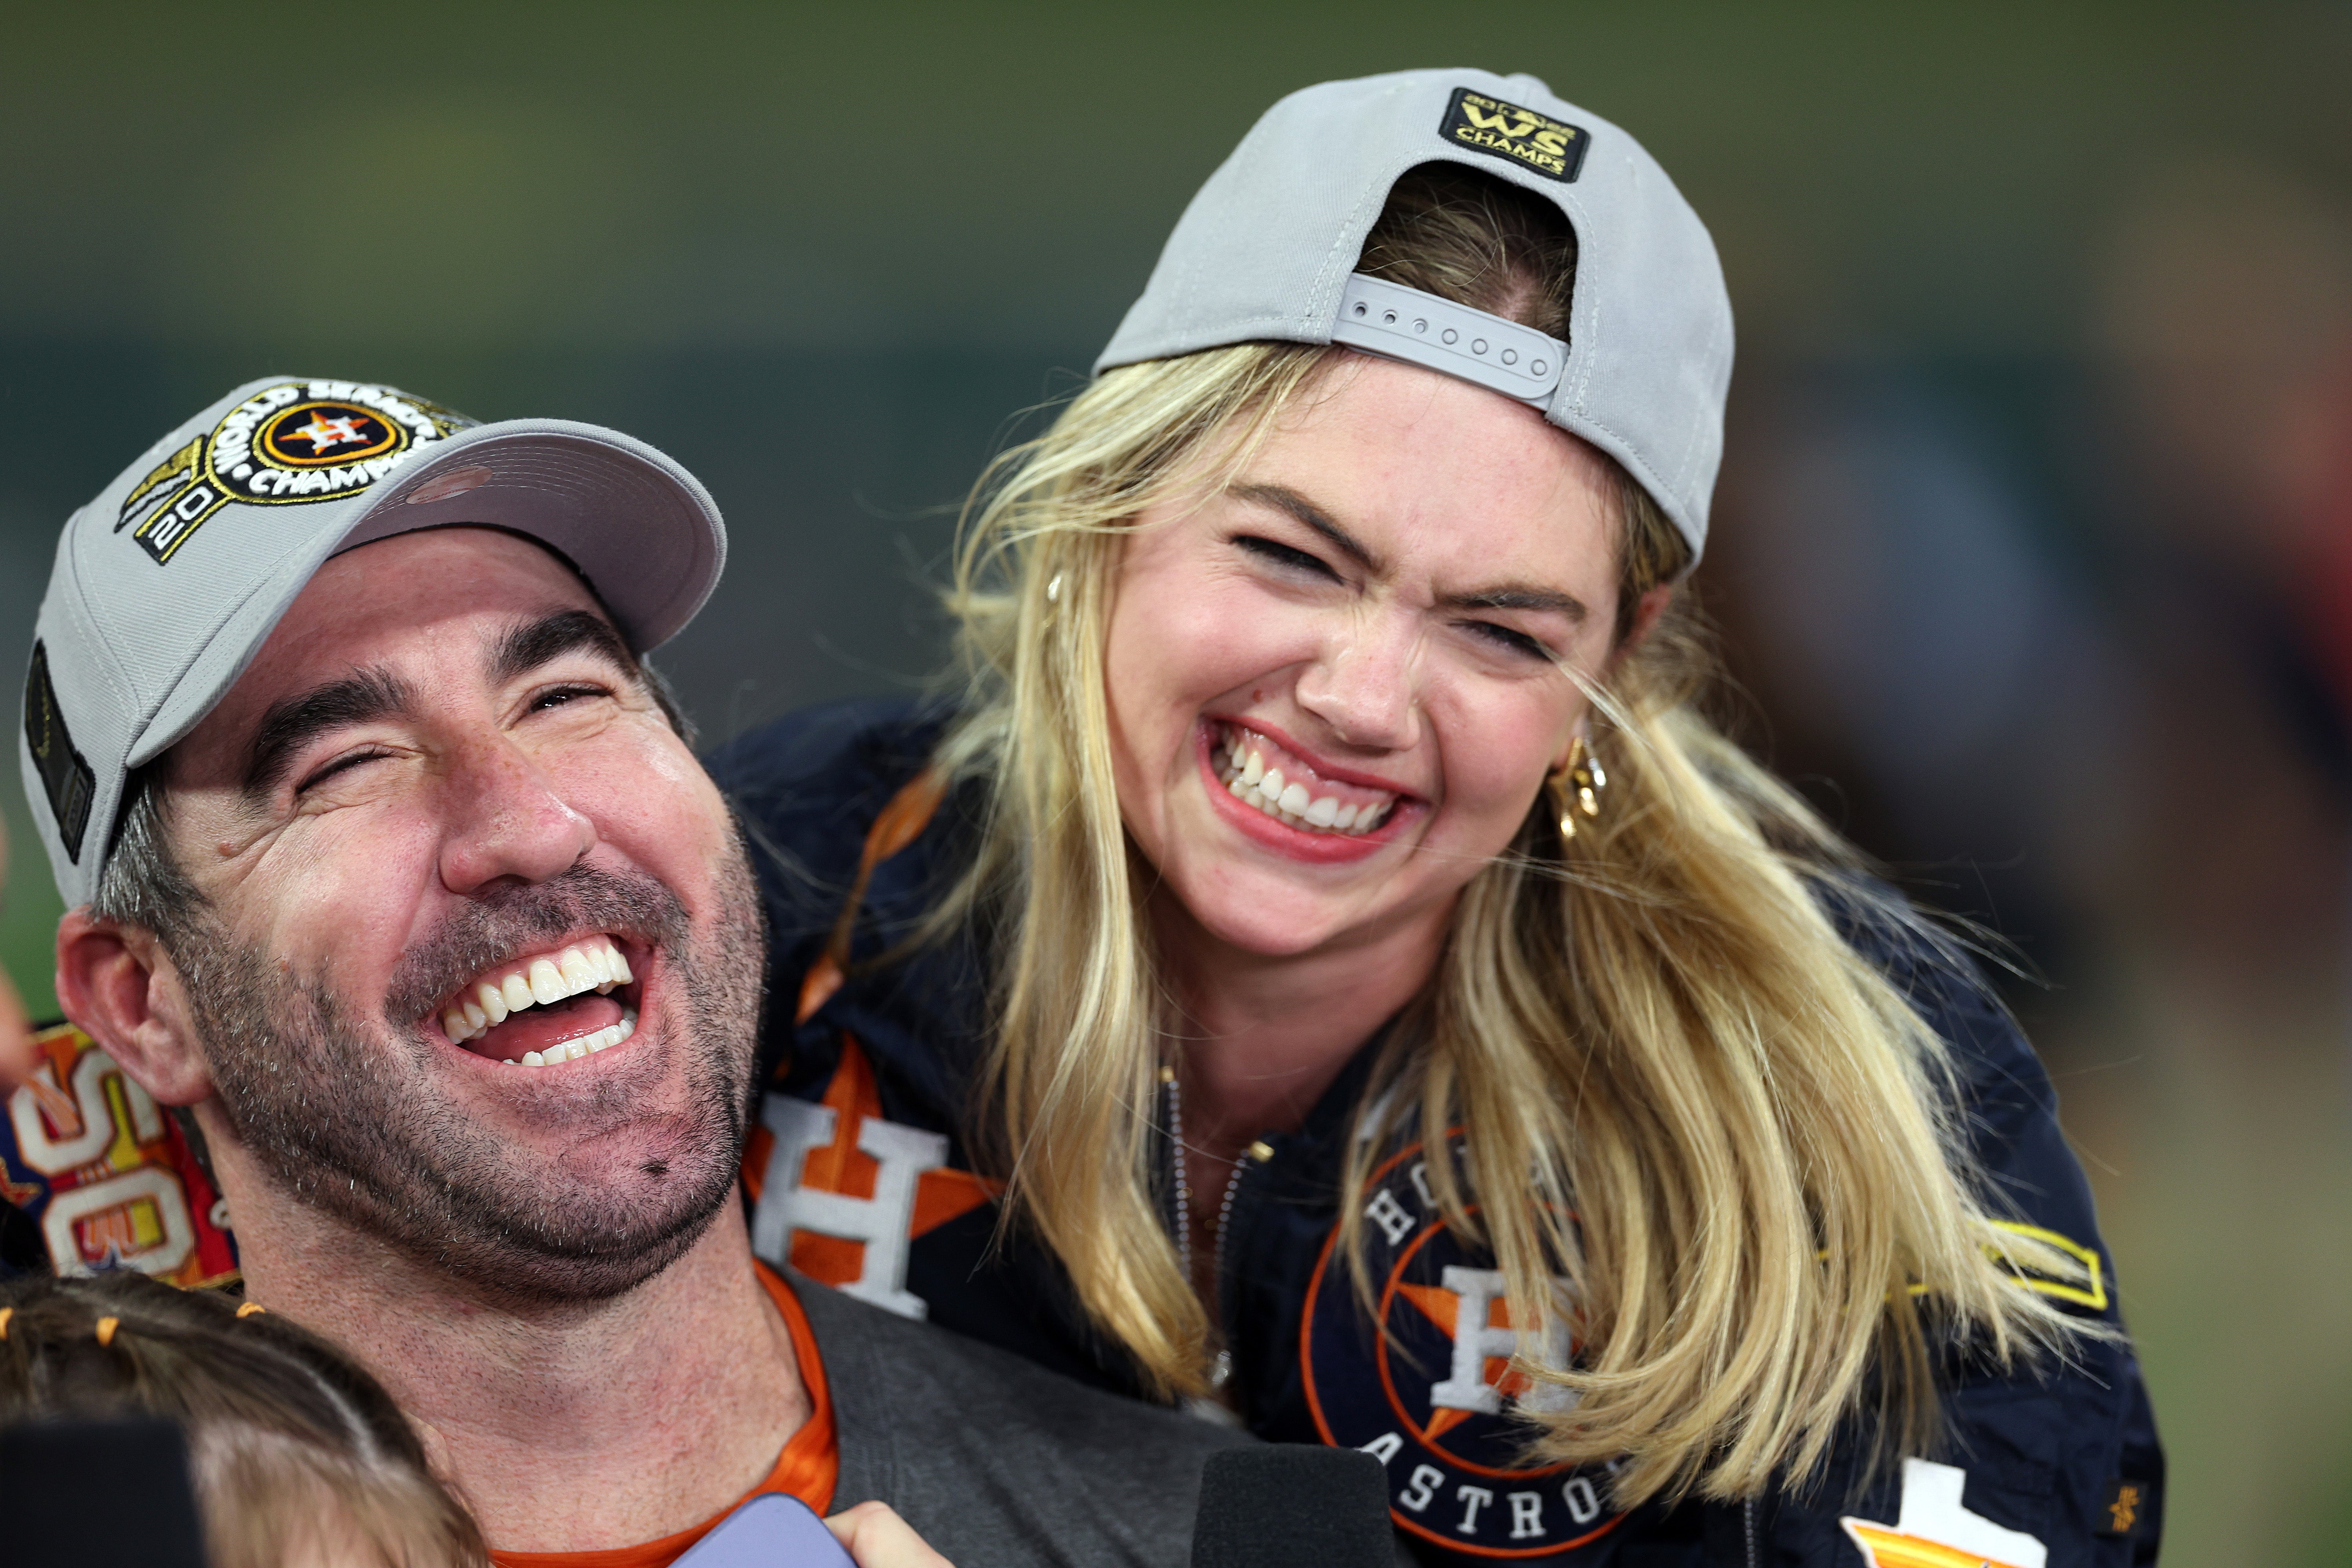 Kate Upton celebrates World Series win with Justin Verlander during post-game interview